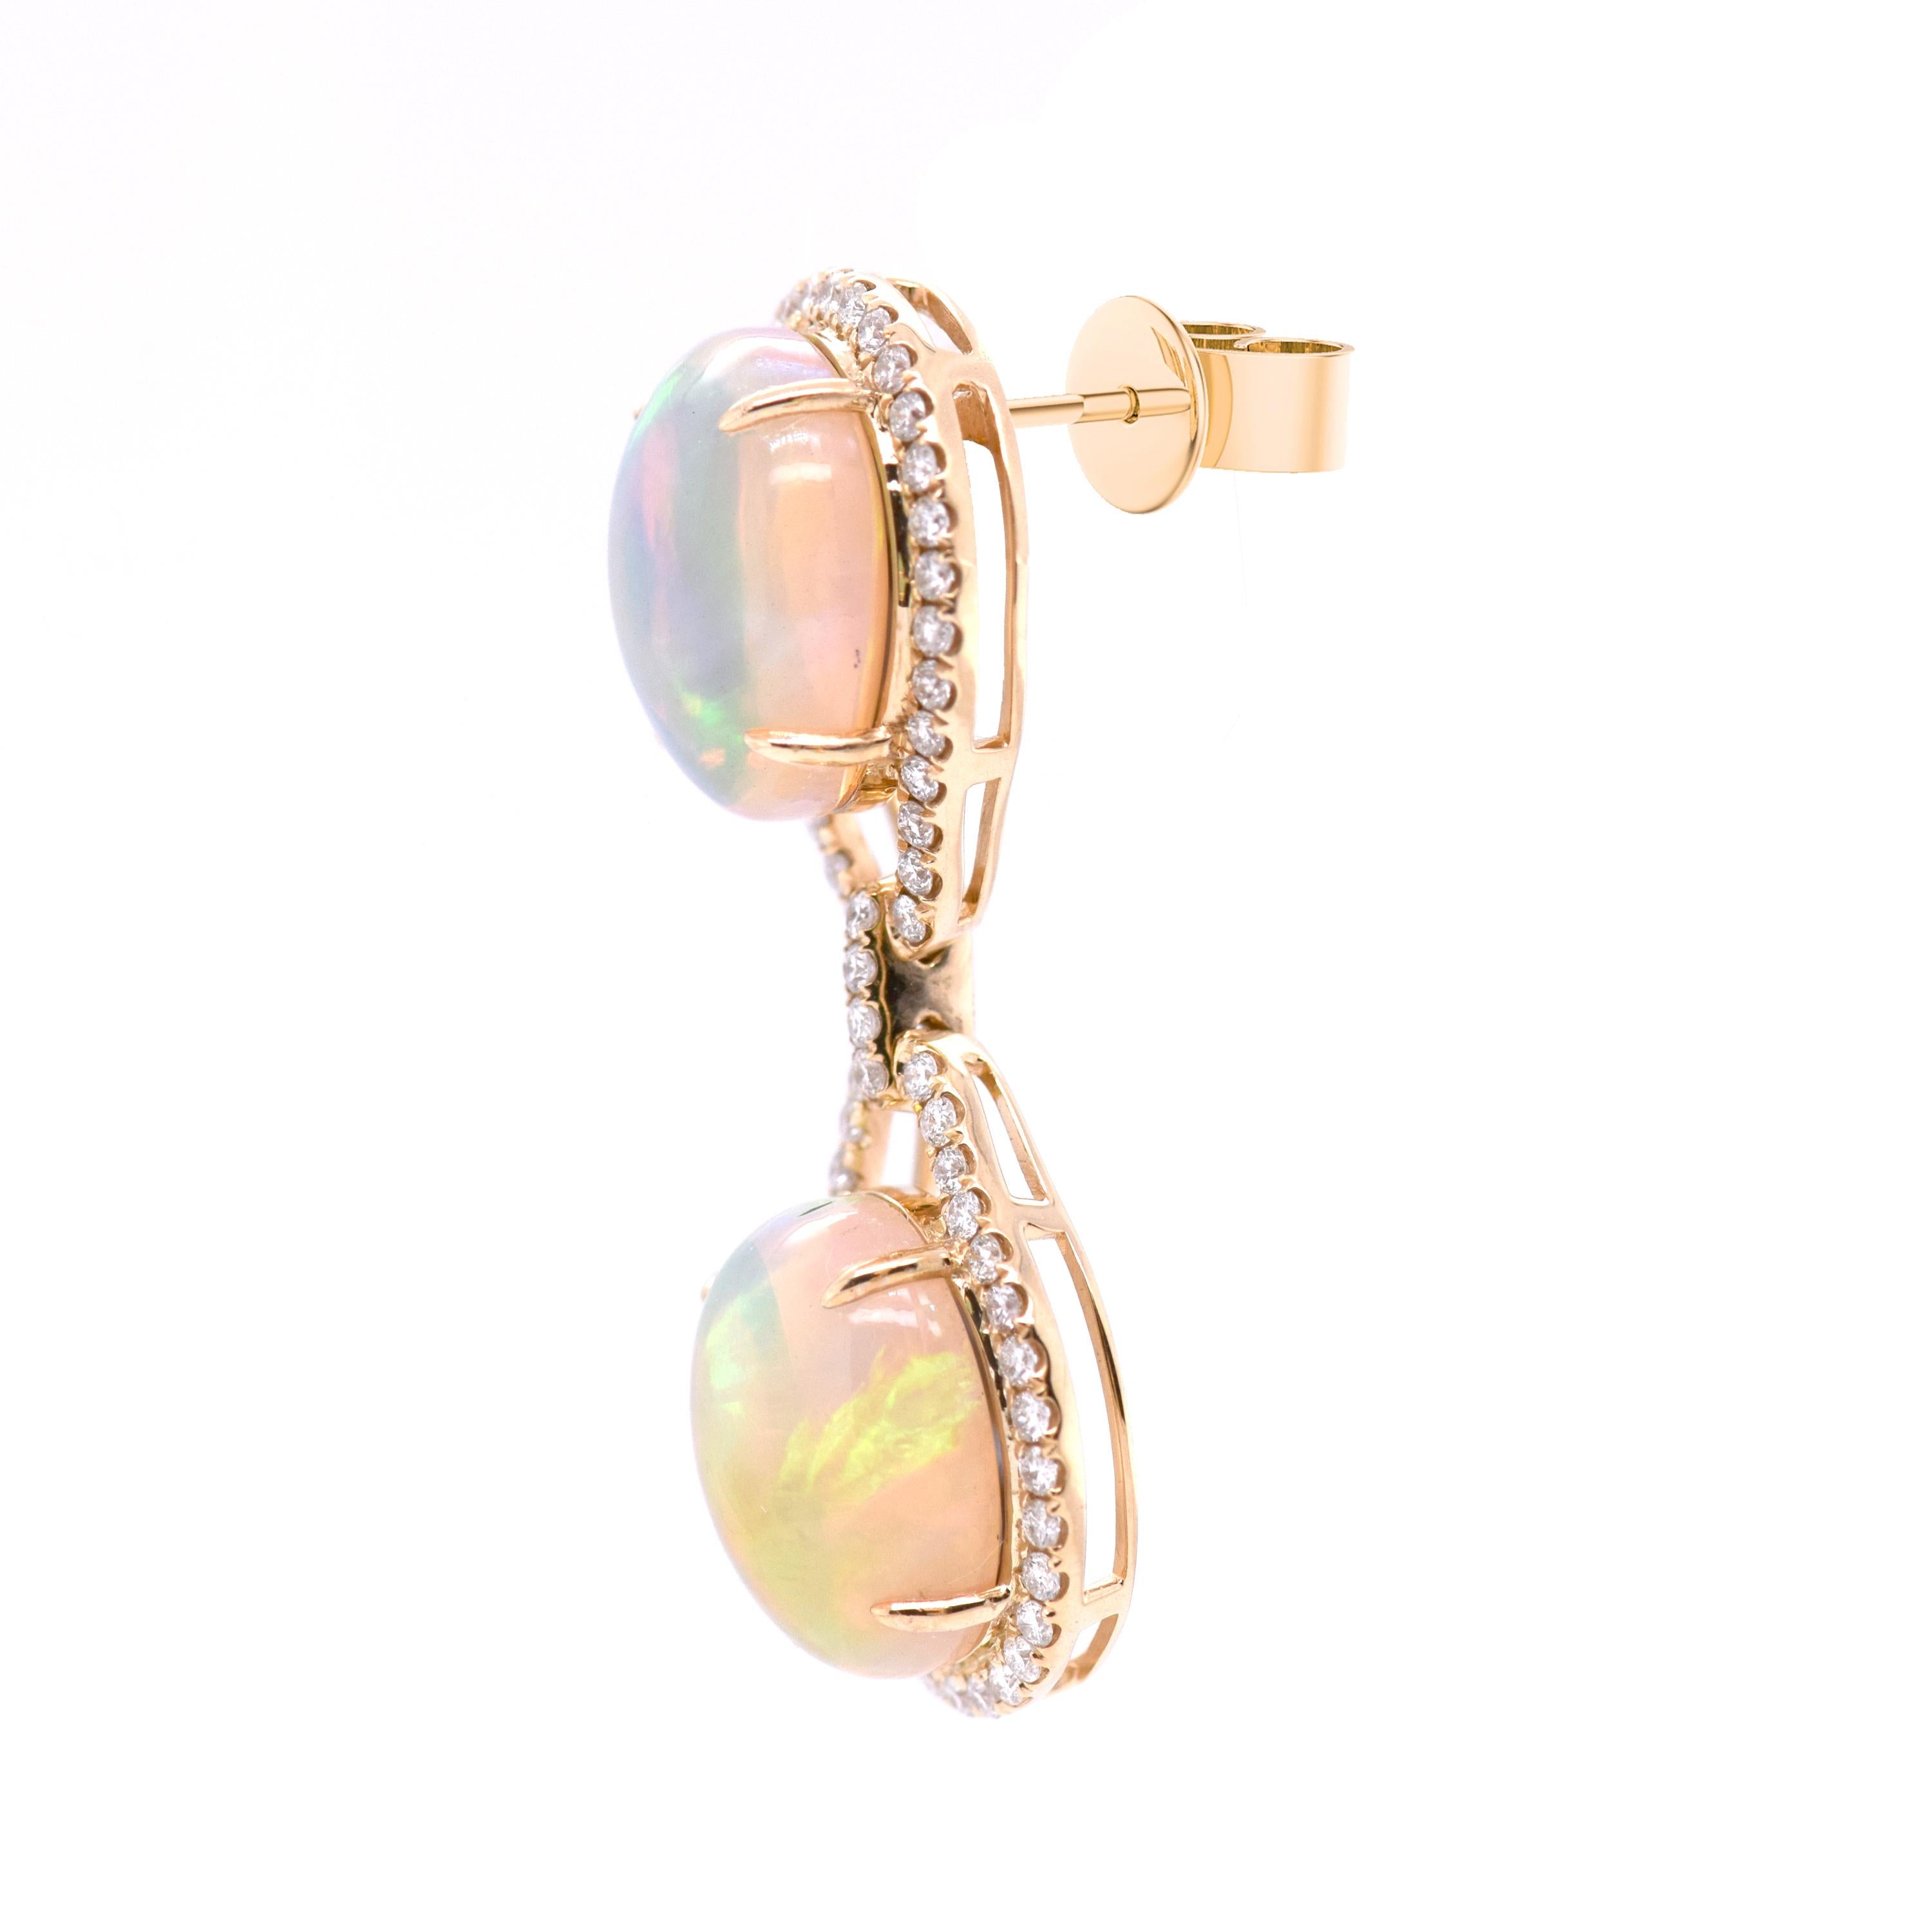 Opulent opal drop earrings in 18ct yellow gold. Featuring colourful opals with a total weight of 14.2ct, bordered with diamonds totalling 0.896ct in weight. 

- Weight per earring: 5.2gm
- Dimensions (HxW): 36mm x 13mm

Fei Liu Fine Jewellery is an